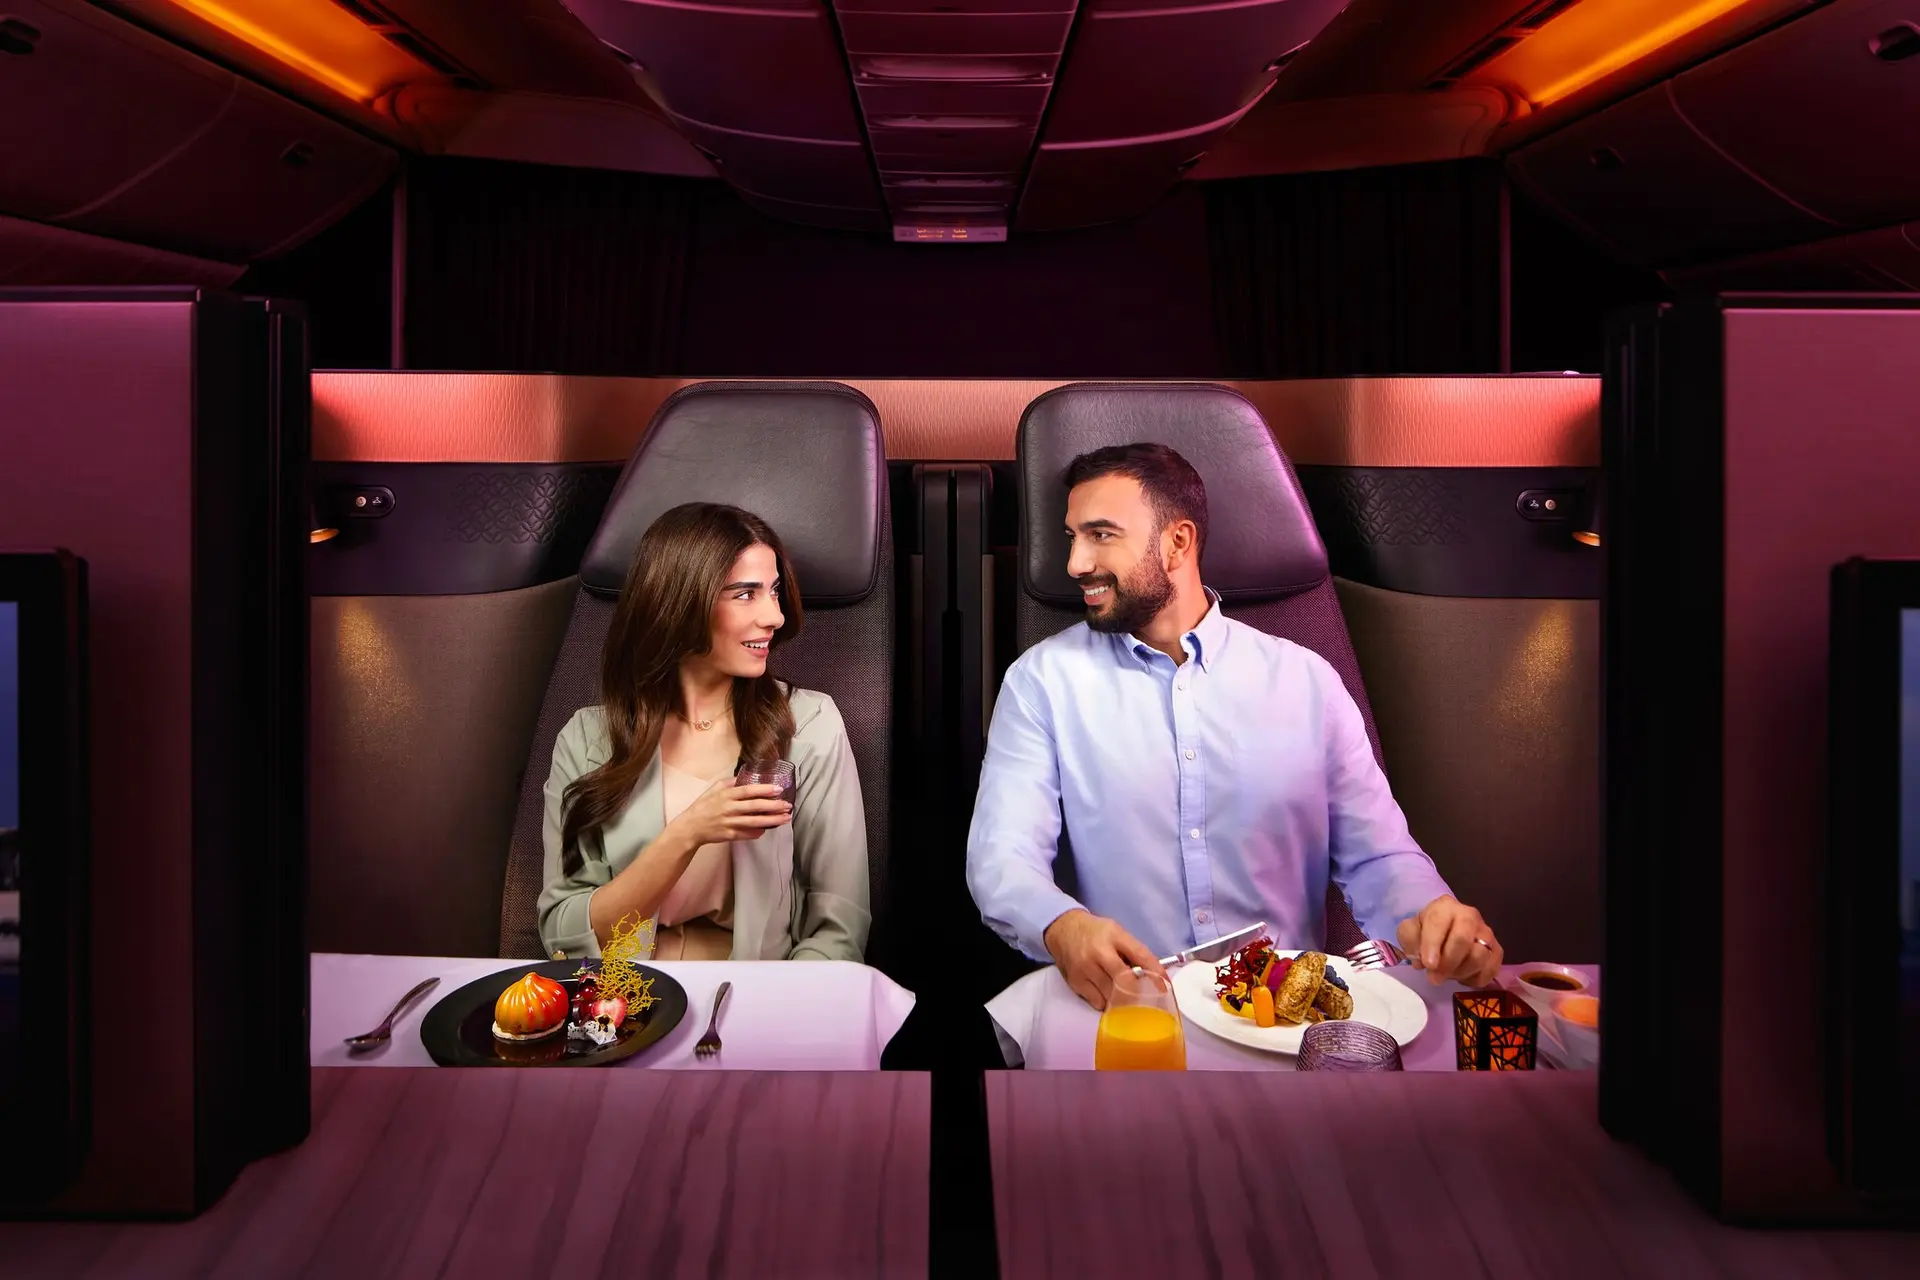 Happy couple sitting on double seats on a businessclass flight smiling at eachother while enjoying a meal.